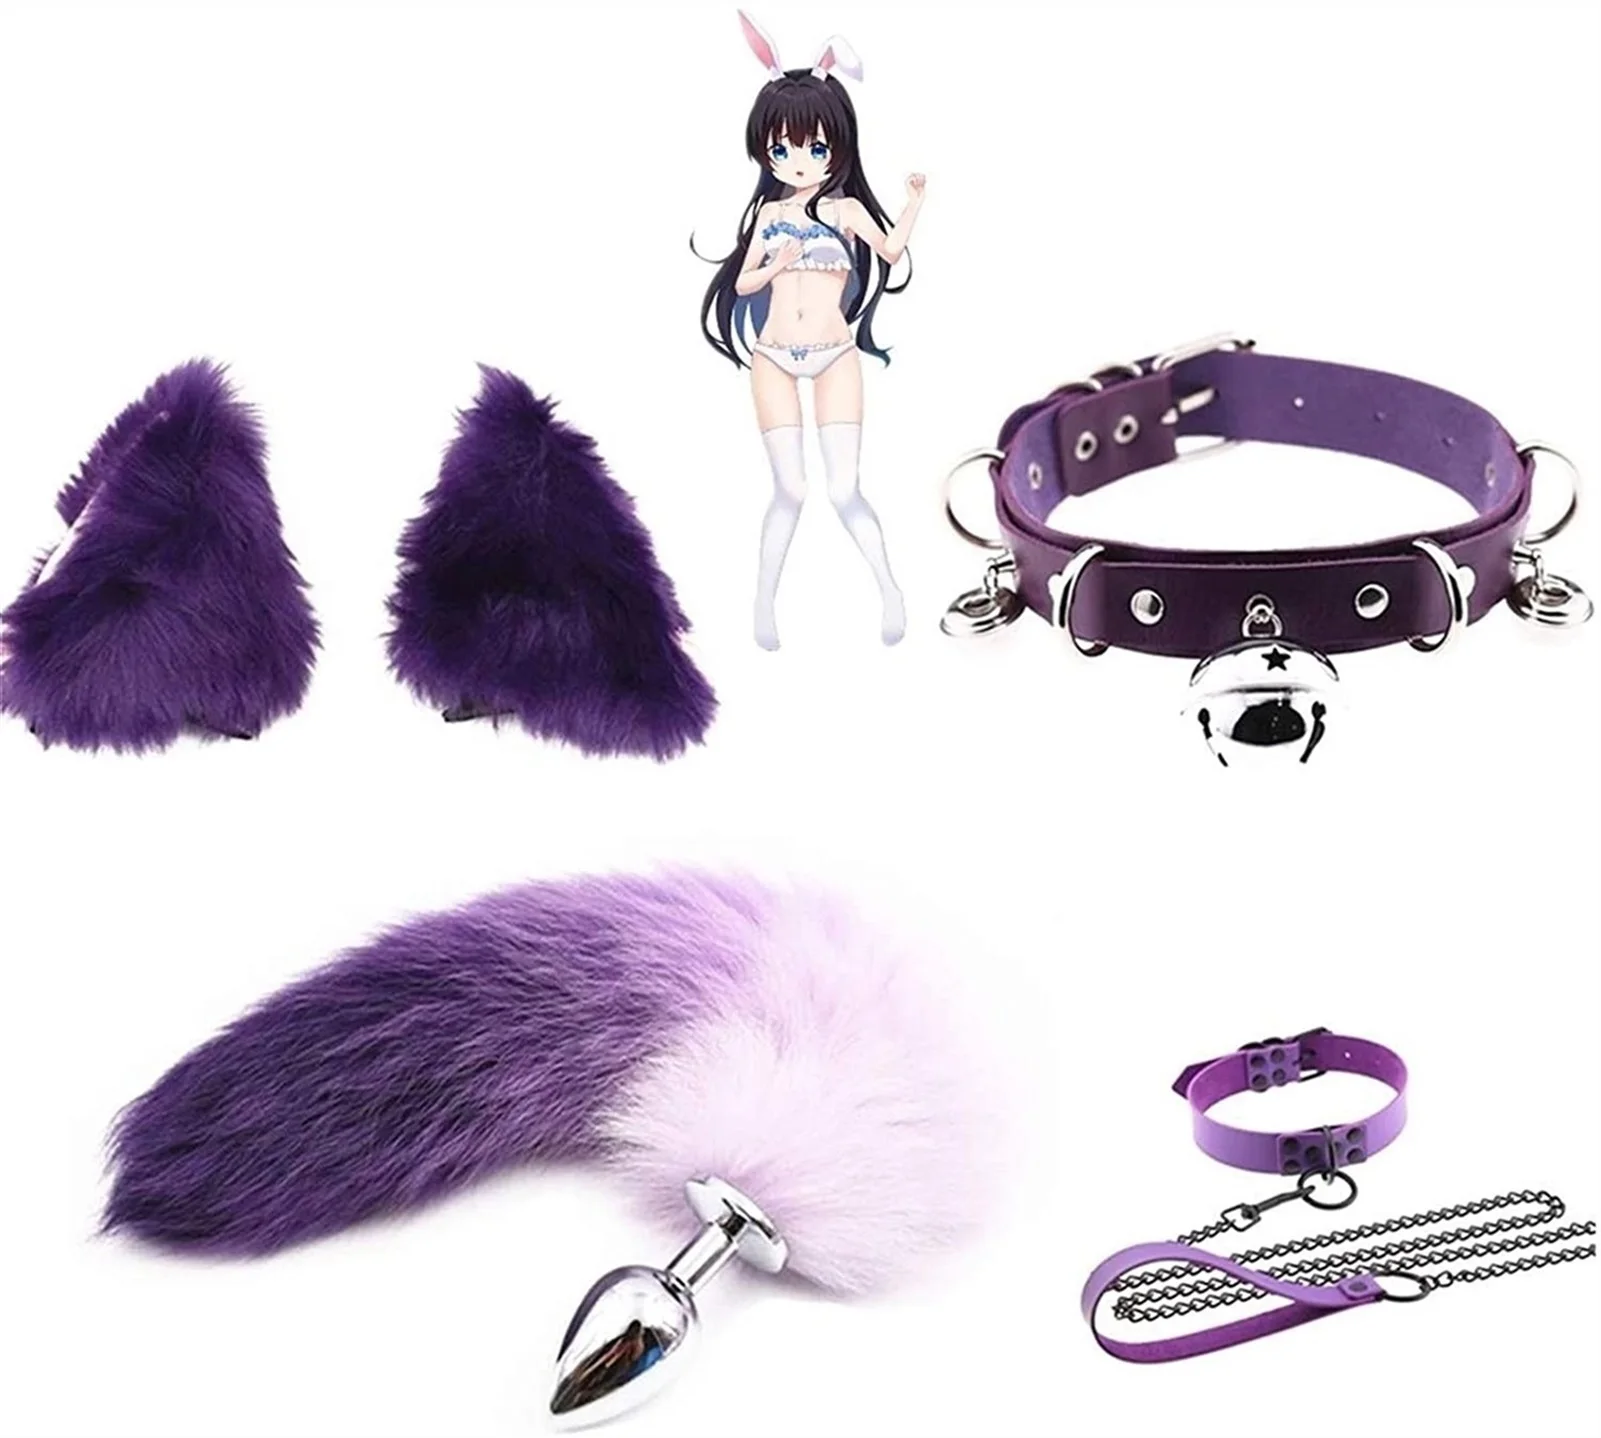 4pcs Stainless Steel Butt Plug Set With Fluffy Plush Fox Tail And Cat Ear  Anales Plugs Kit Anime Sexy Cosplay Bdsm Toys - Buy Bdsm Toys,Bdsm Anime  Sexy Cosplay,Bdsm Butt Plug Set